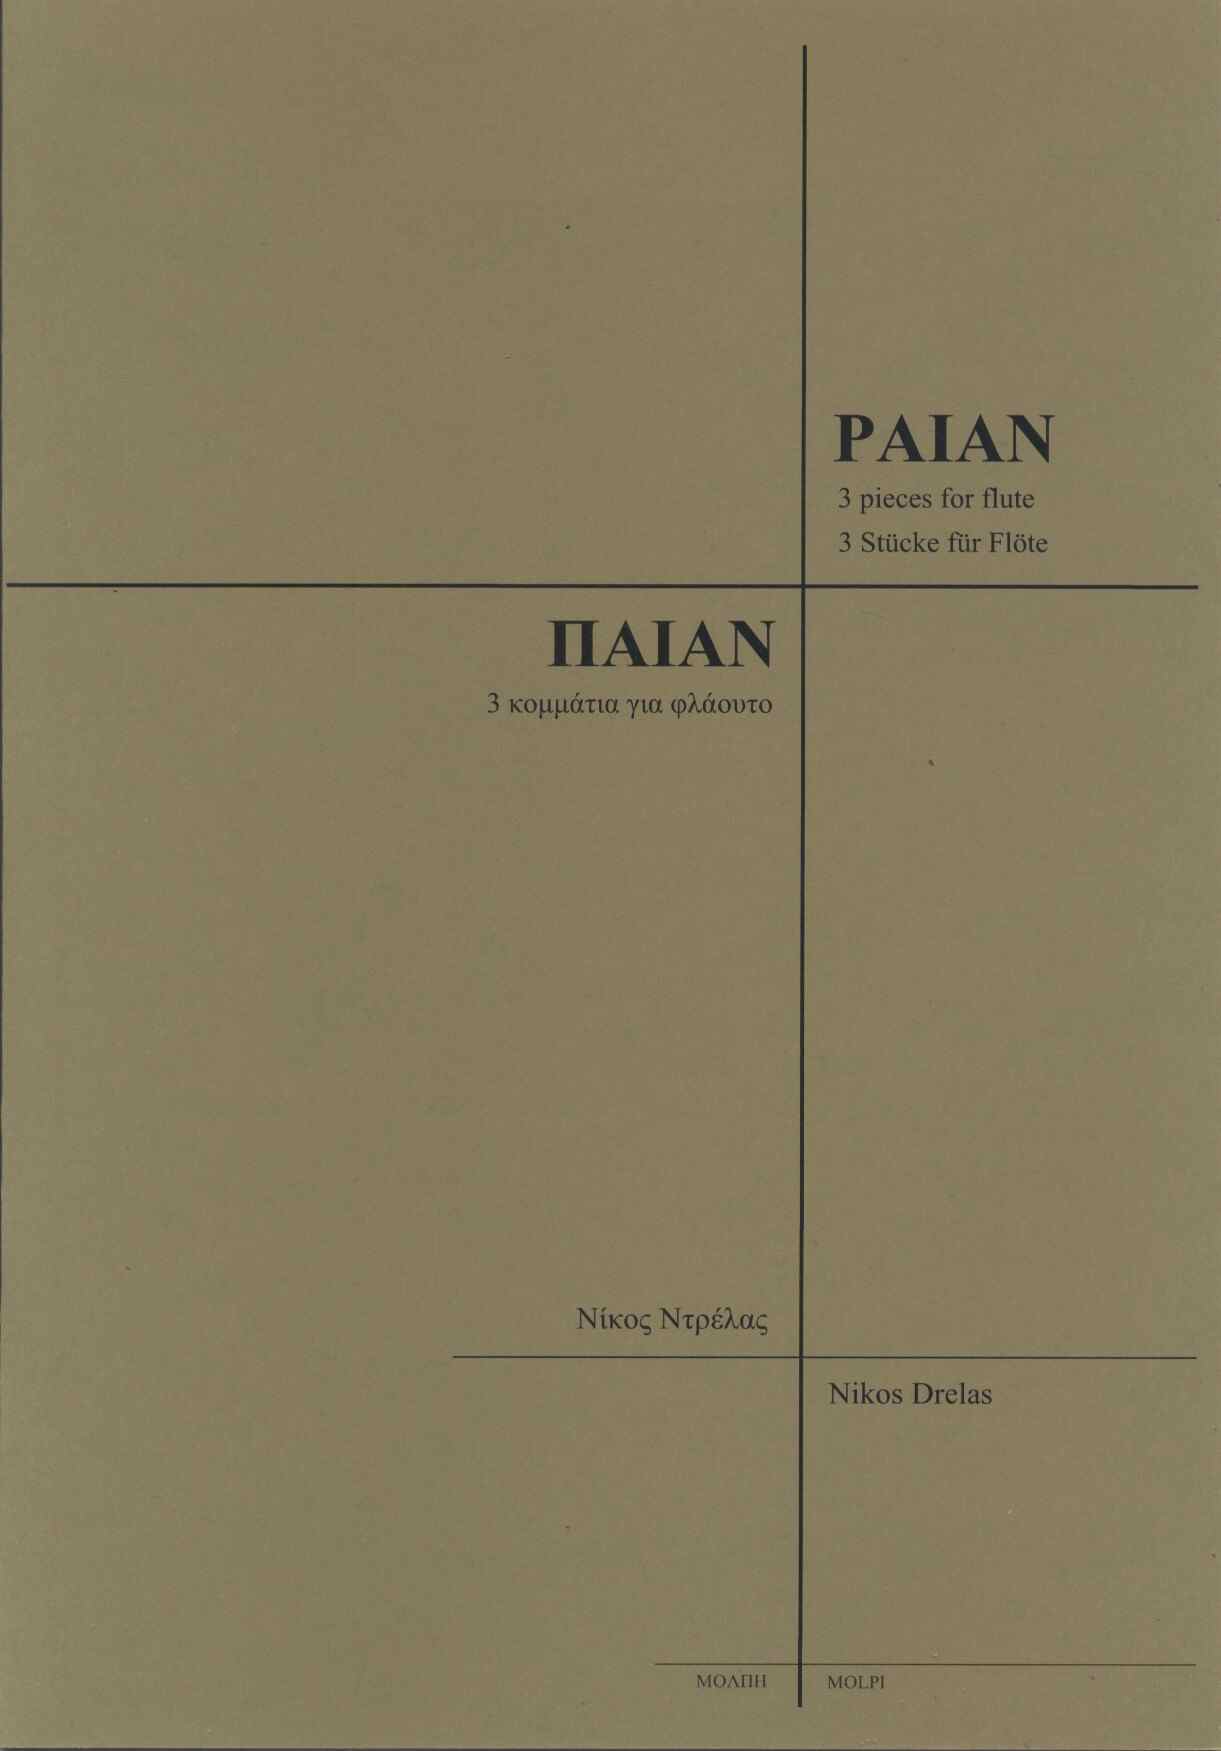 Paian for Flute-1-COVER